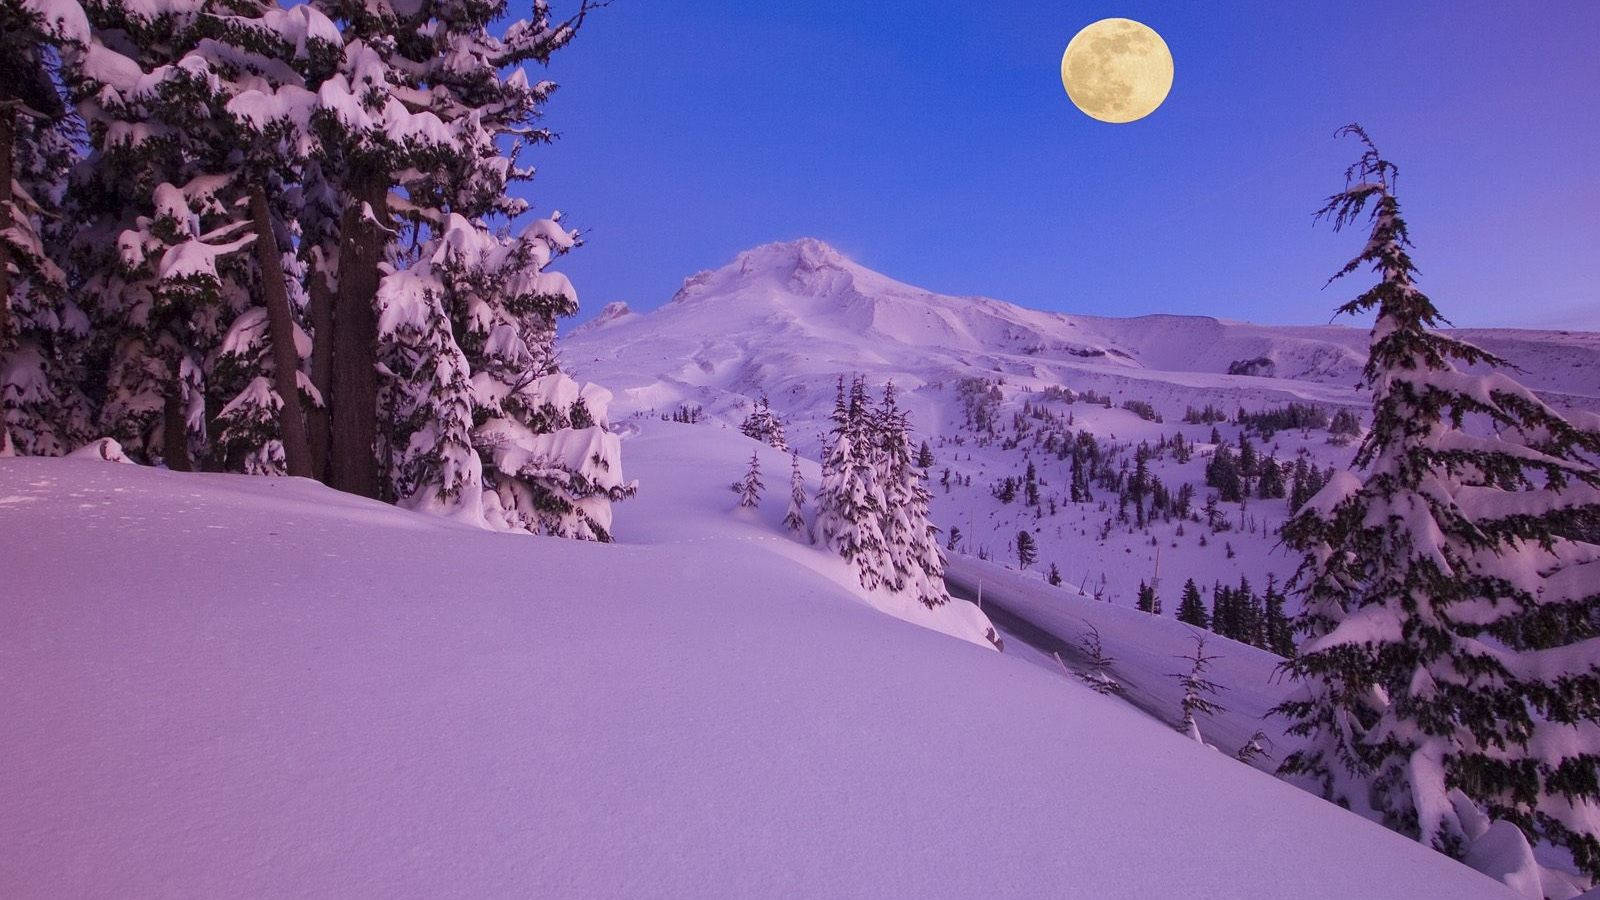 Enjoy the Beauty of Nature with Snow Desktop Wallpaper